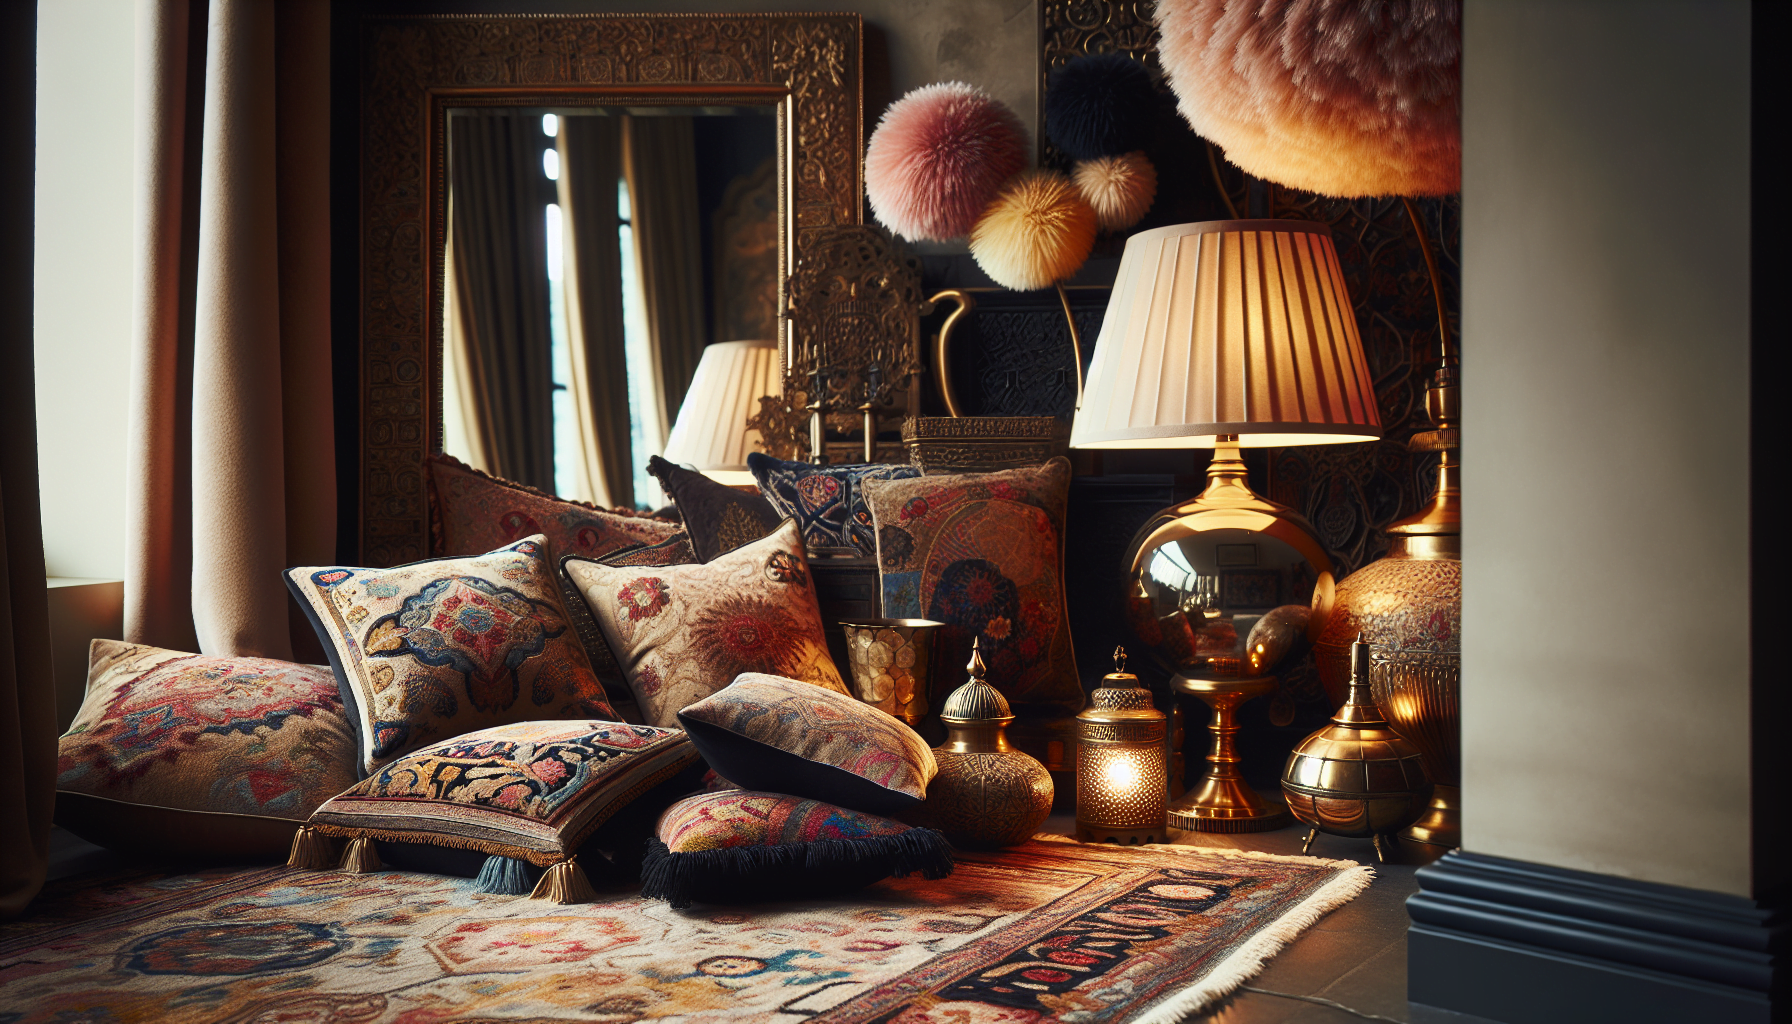 Stylish decor items including rugs, pillows, and lamps